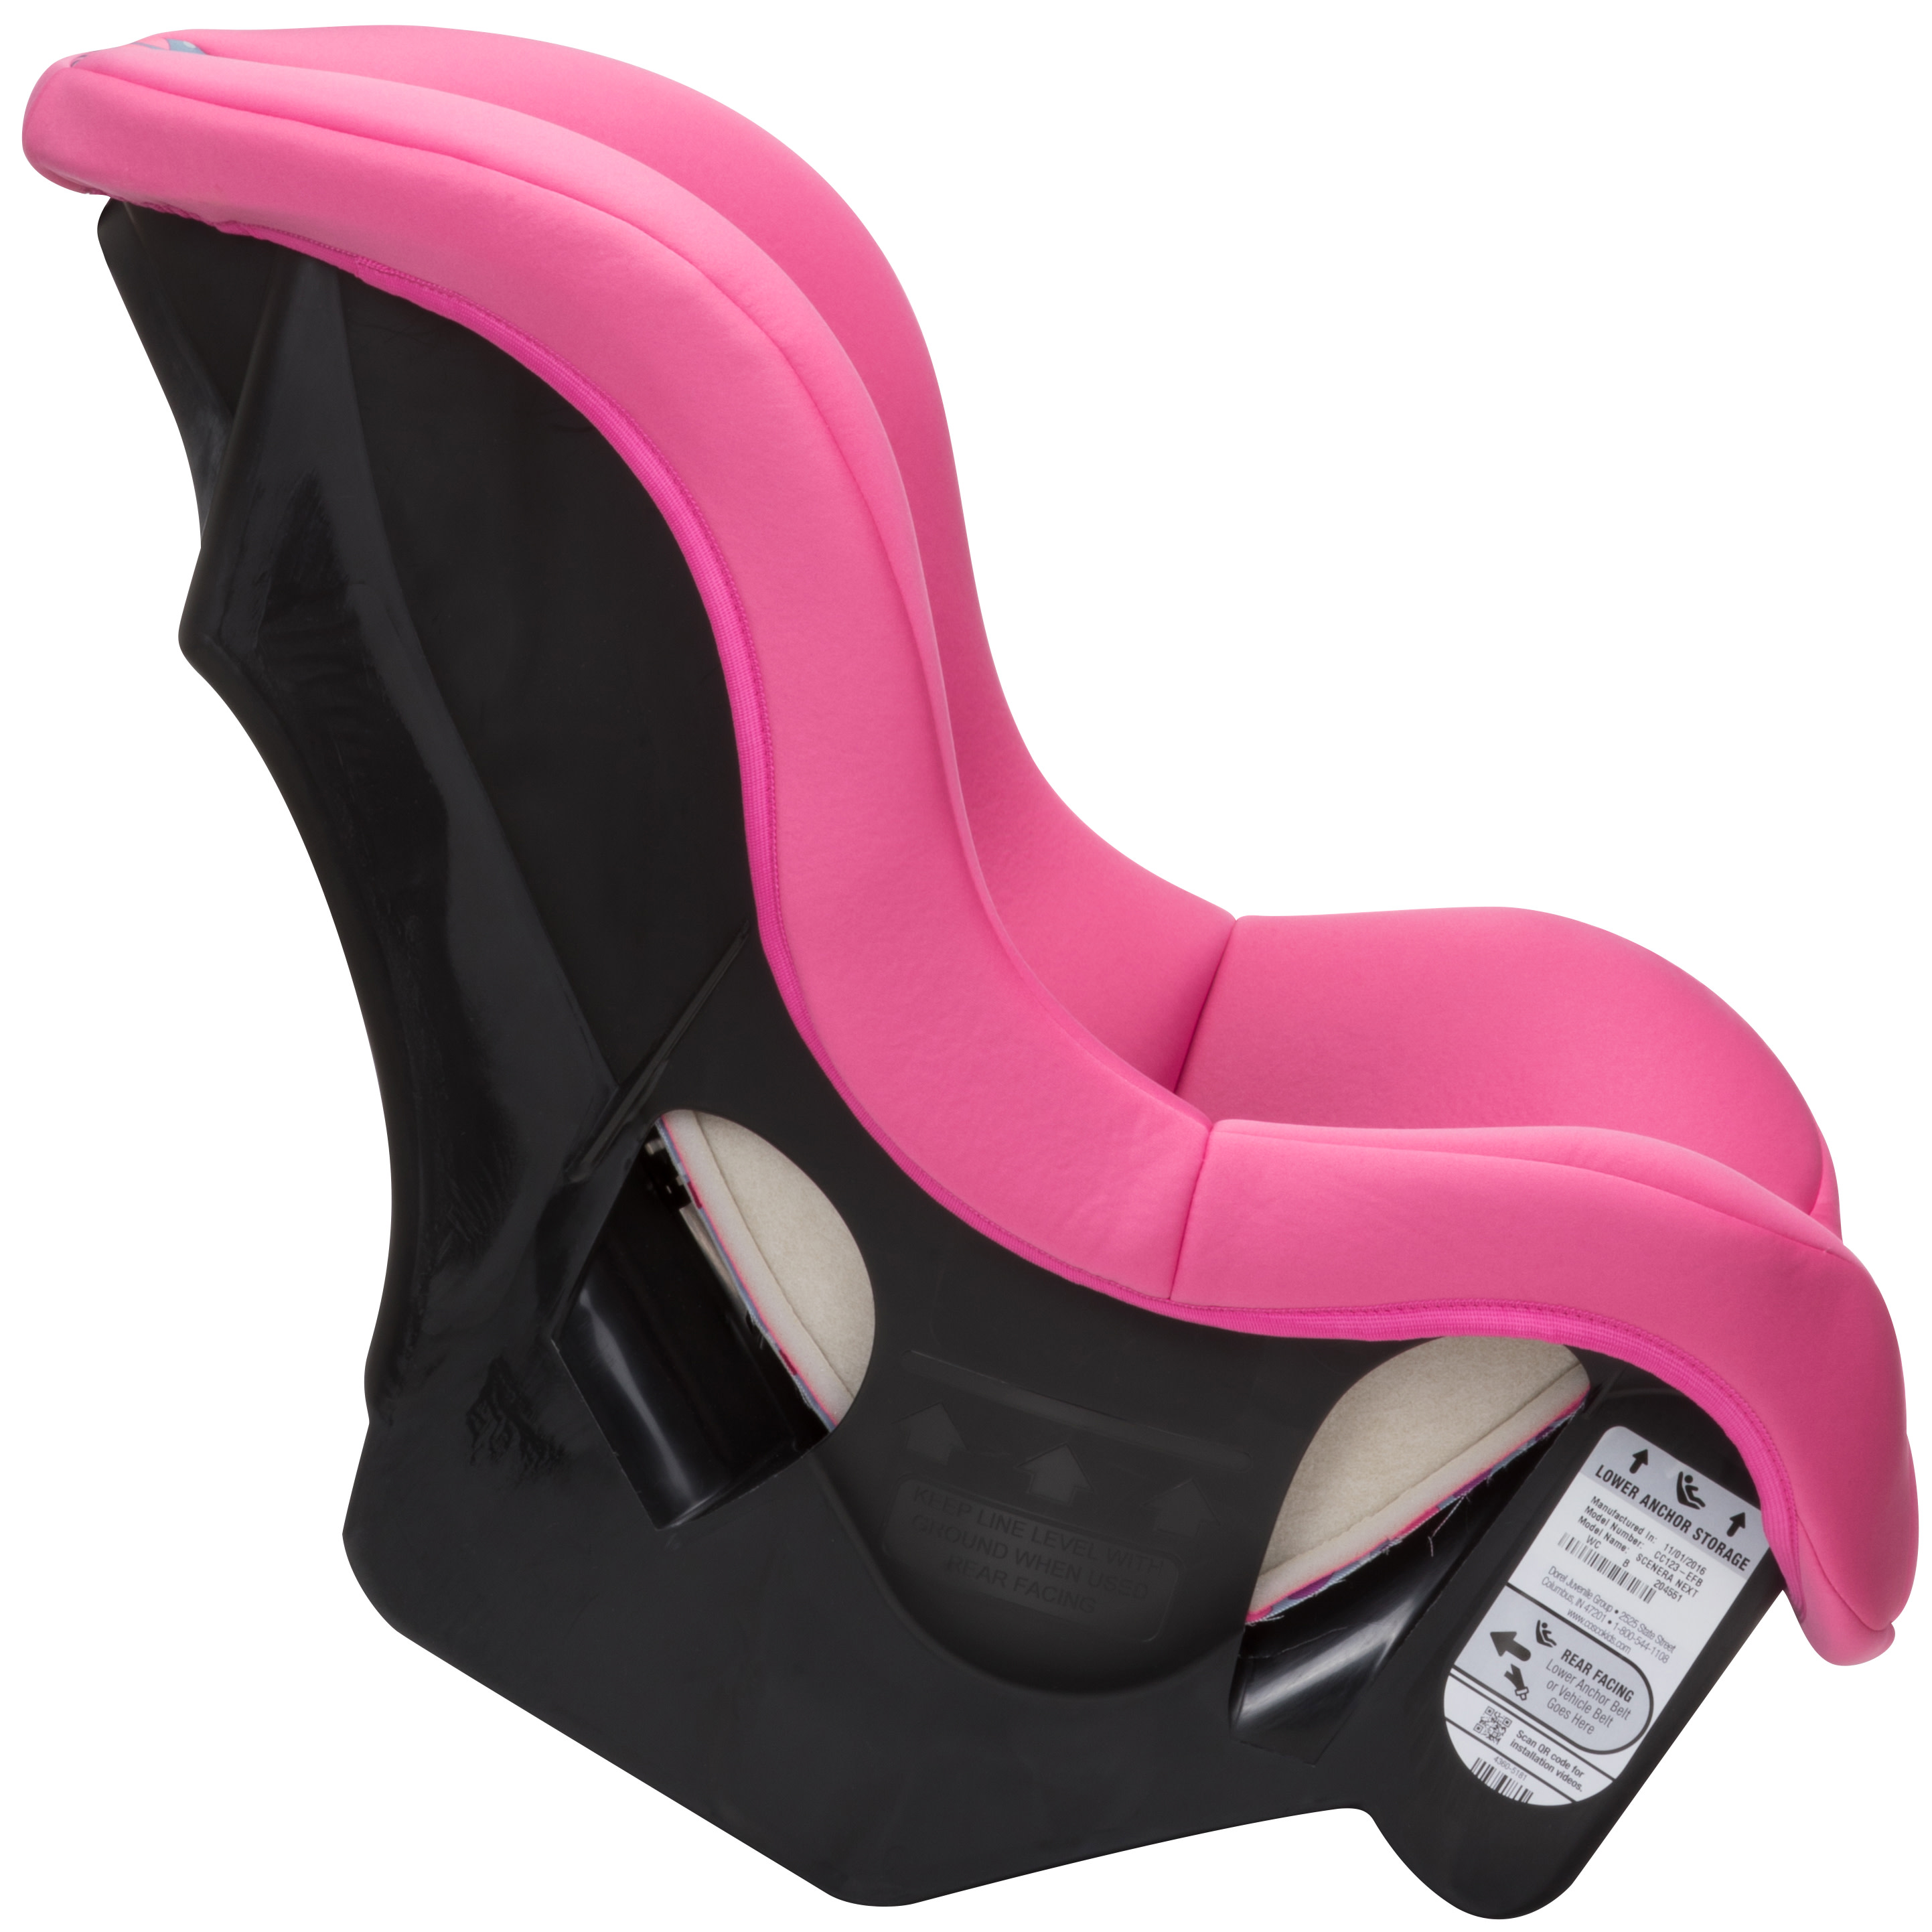 Cosco Scenera Convertible Car Seat, Floral Pink - image 5 of 12